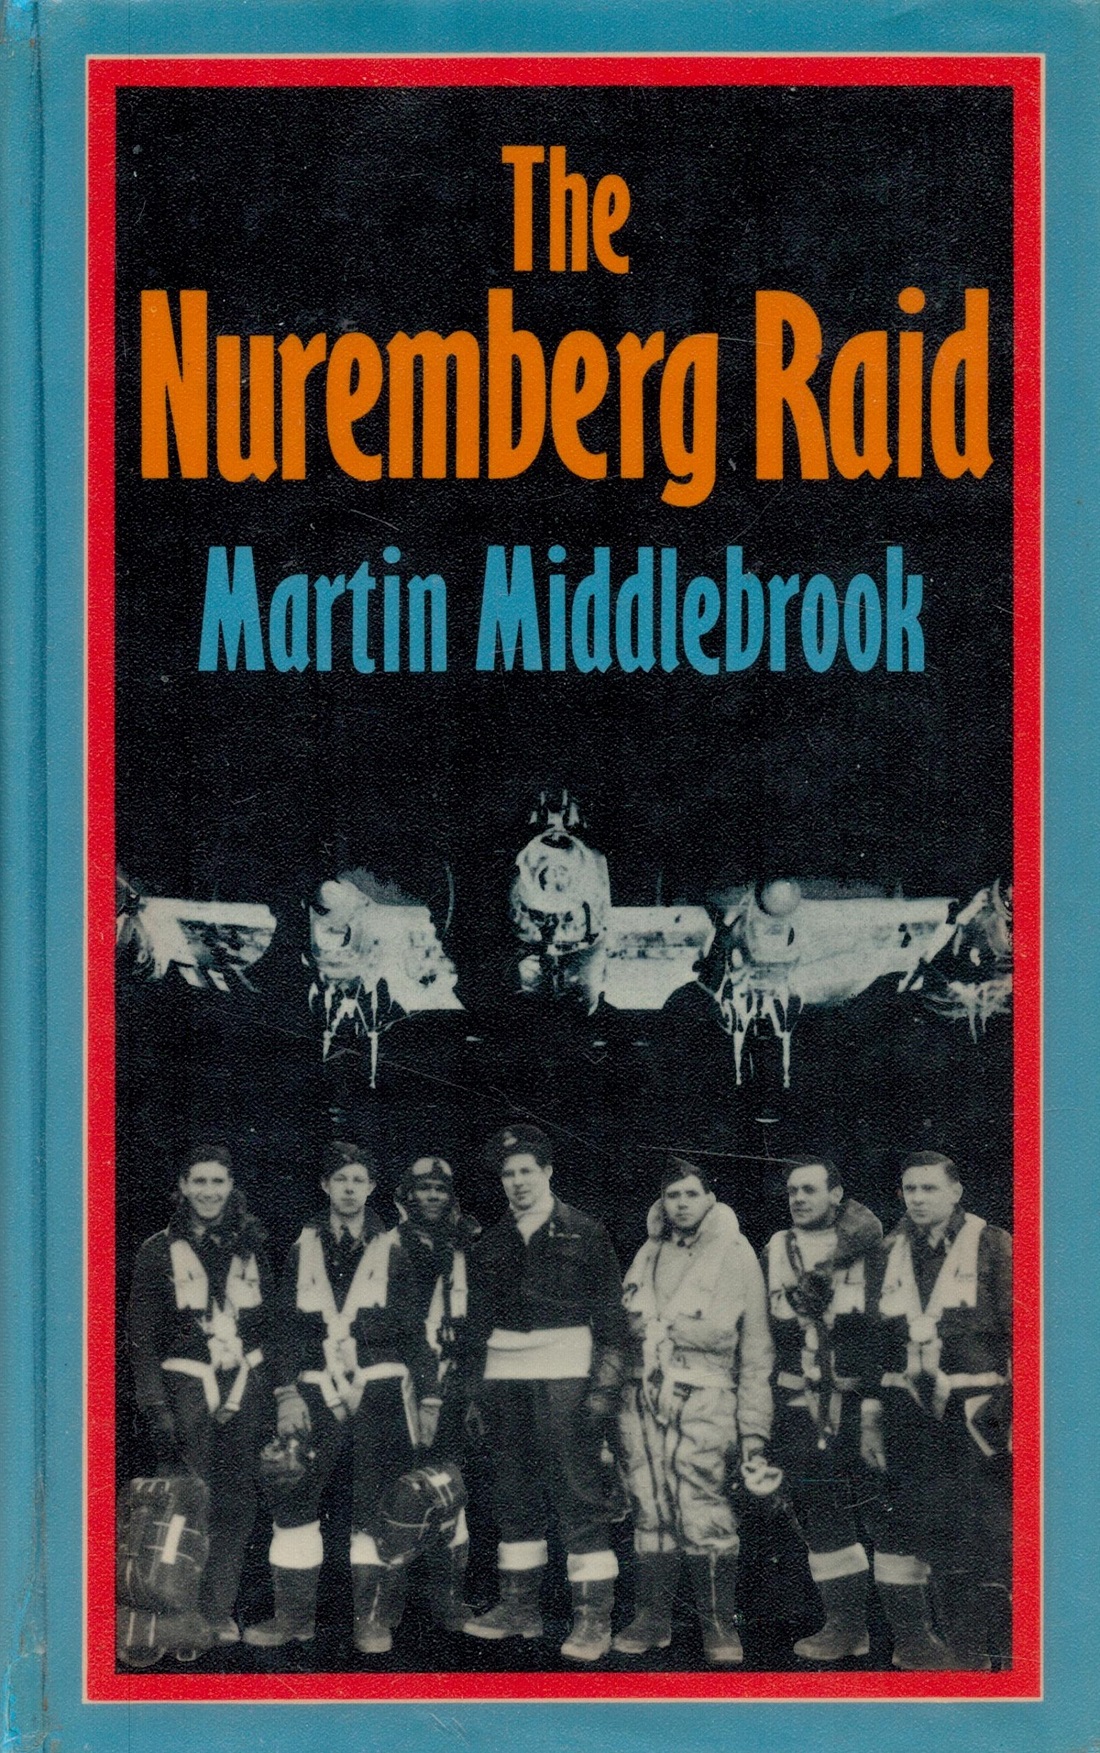 Martin Middlebrook Signed Book The Nuremberg Raid 30 31 March 1944 by Martin Middlebrook 1973